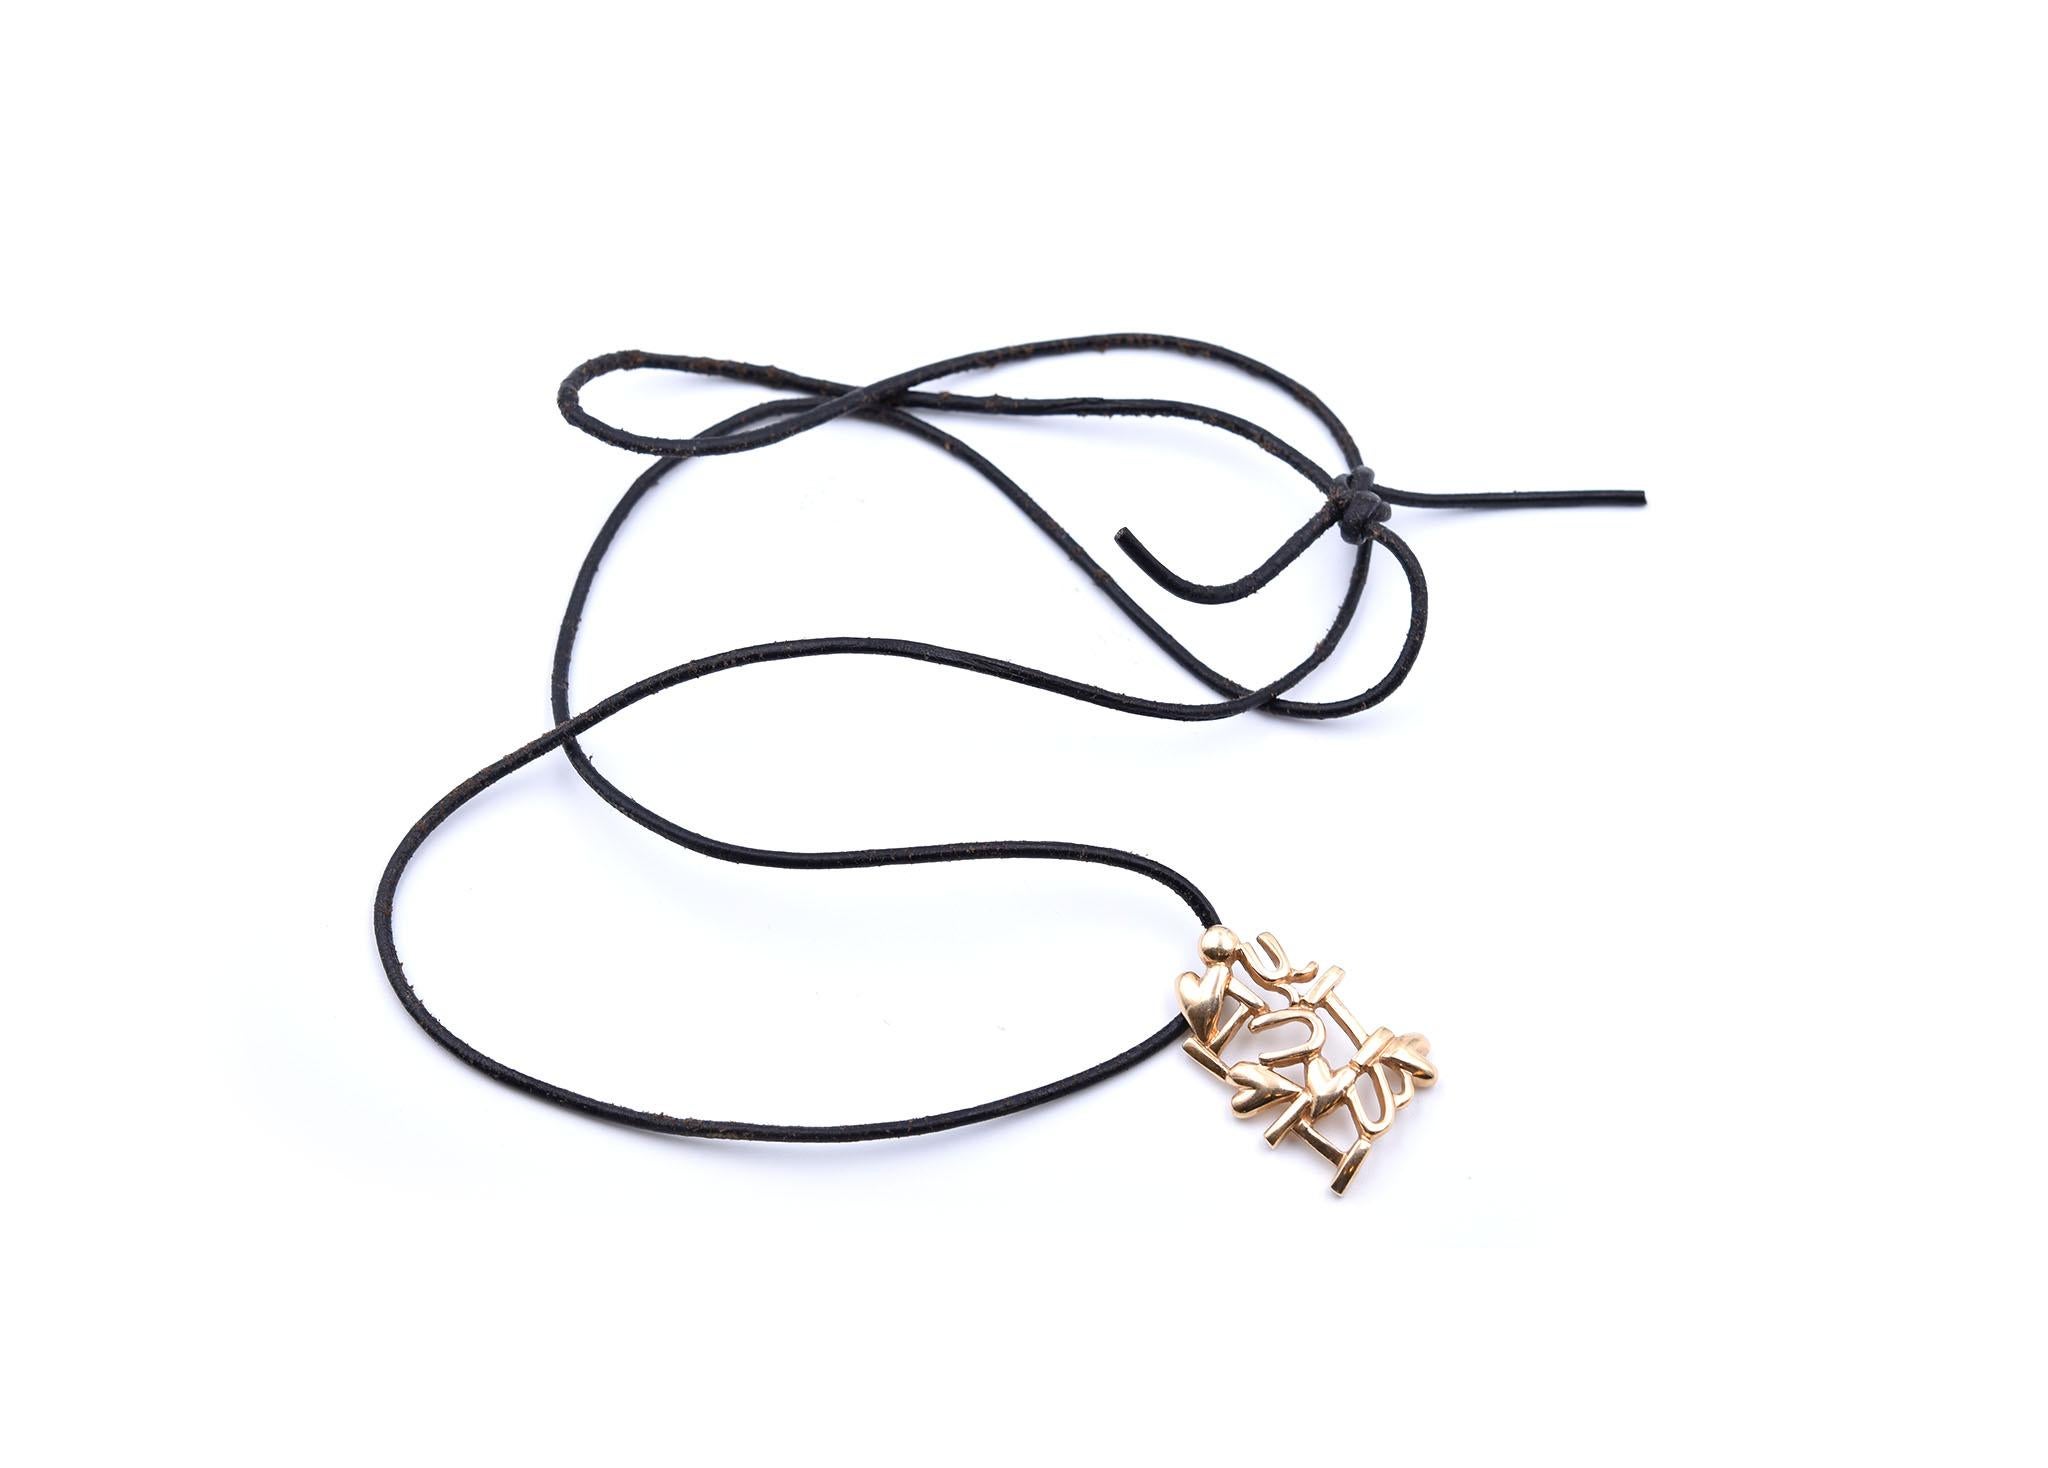 This pendant is crafted in 14k yellow gold and hangs from a black cord. The pendant depicts the text, “I Love U.”  It measures 33x23mm and weighs 17.20 grams. The black cord that the pendant hangs from measures approximately 32- inches in length and